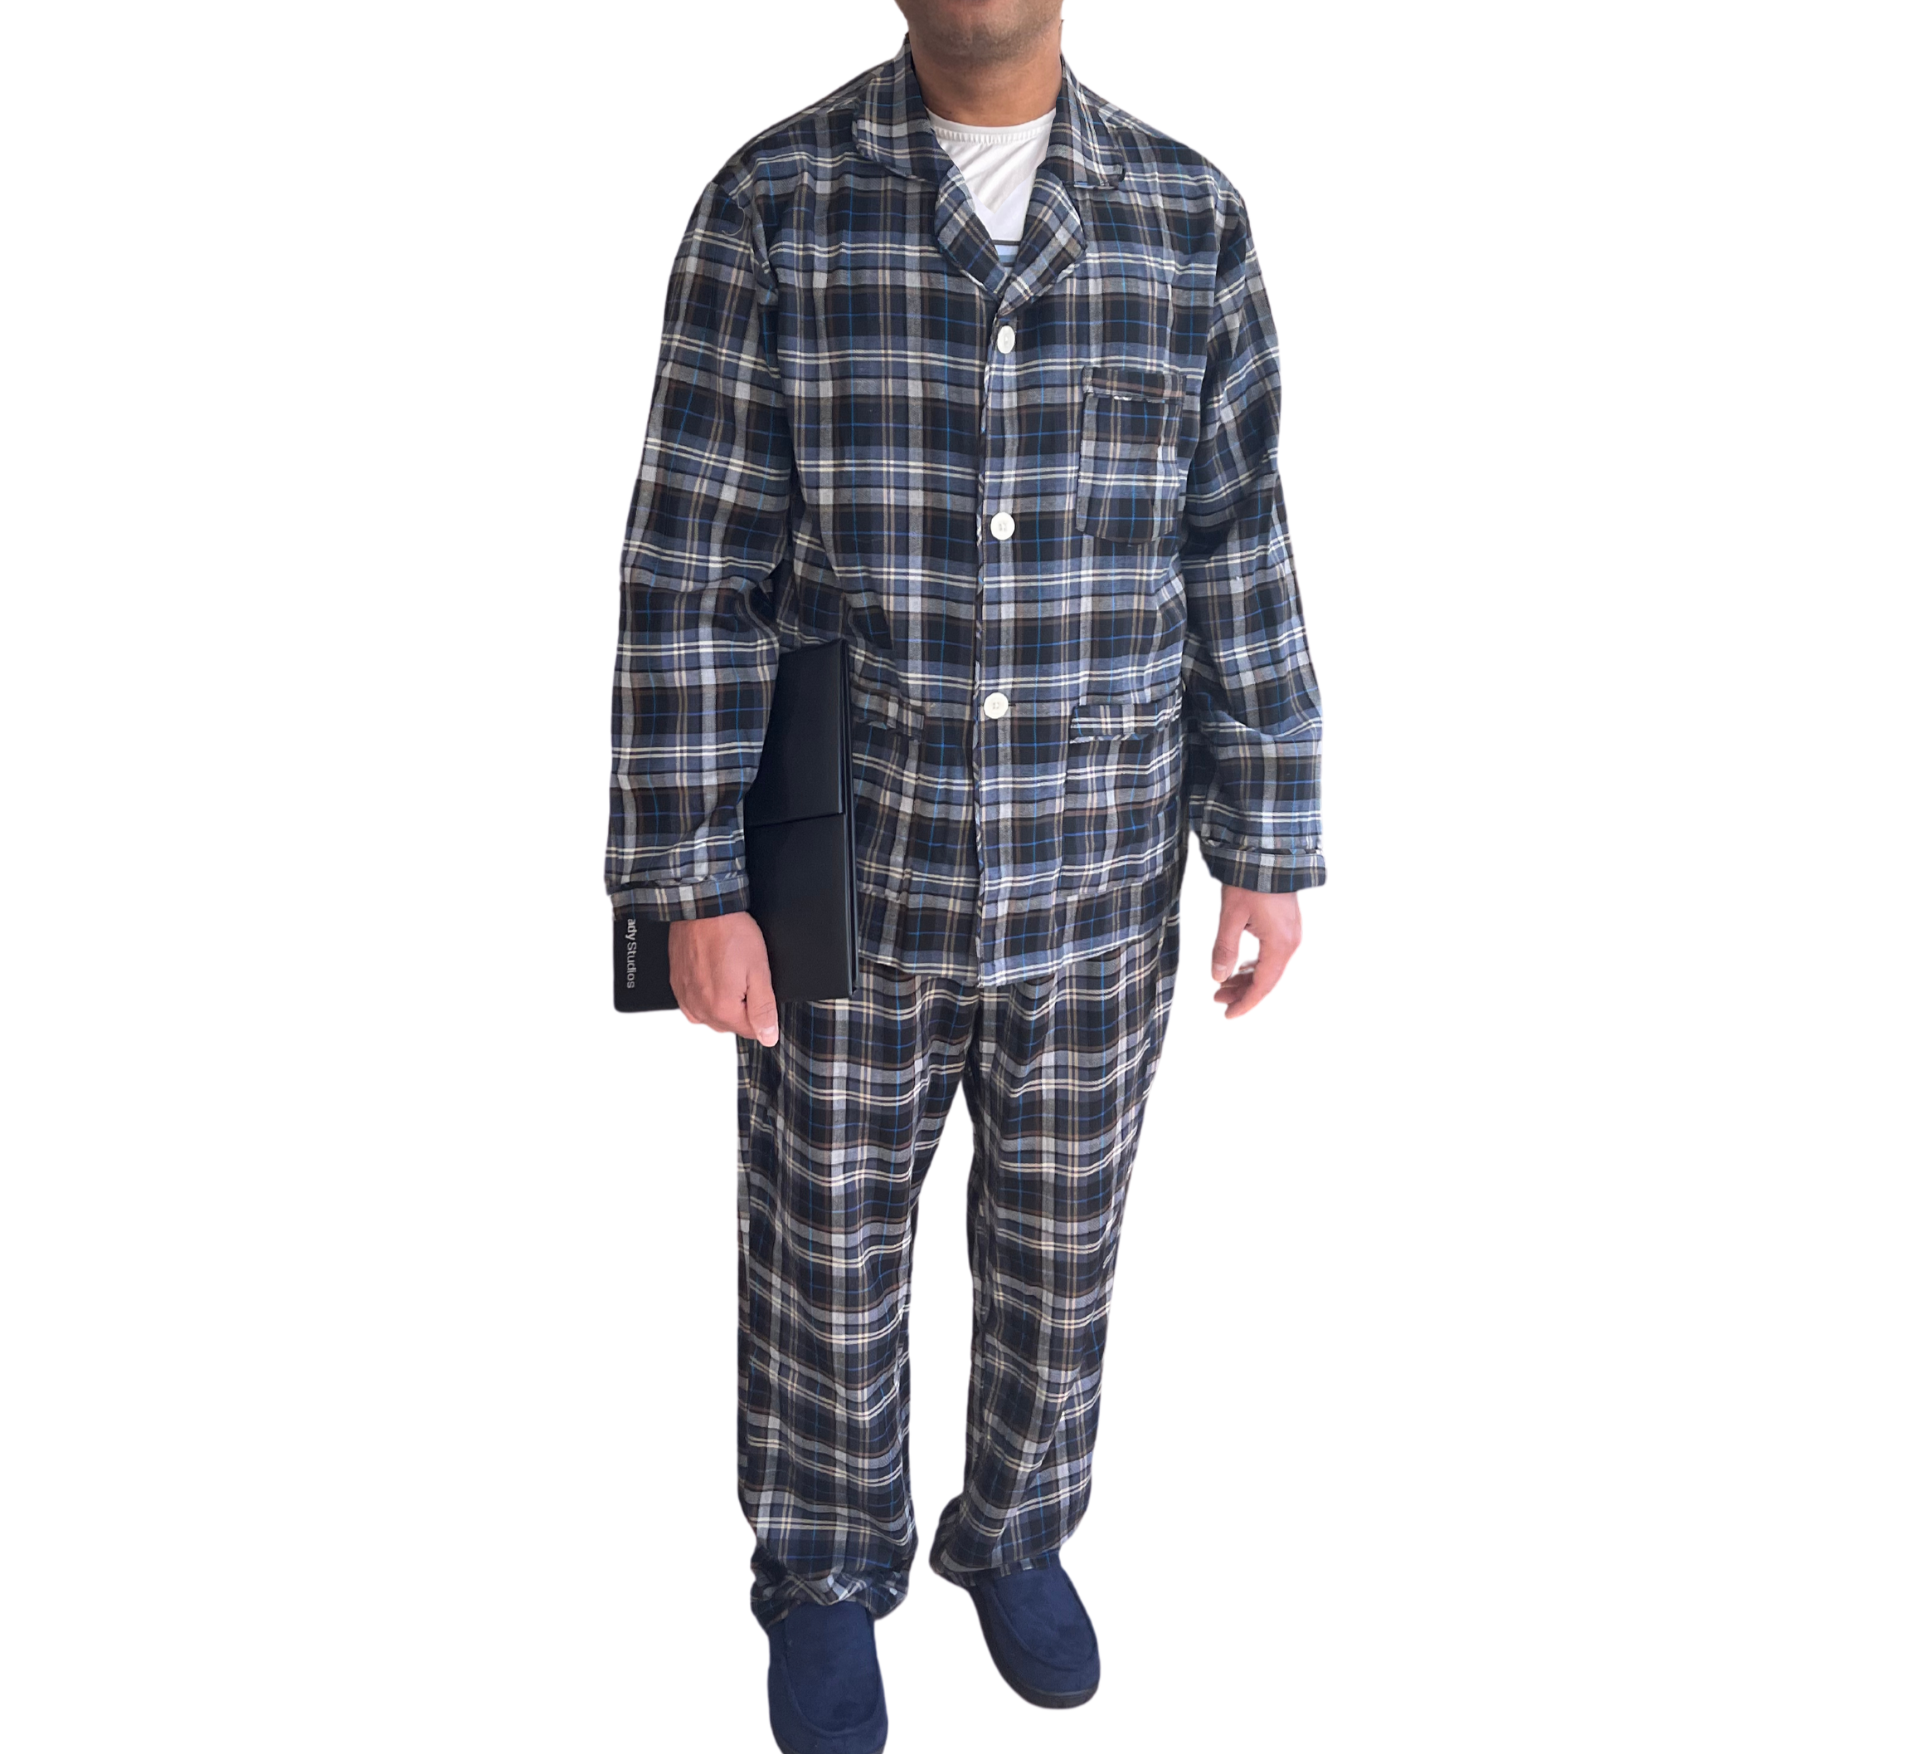 Norty Big & Tall Mens Cotton Blend Yarn Flannel Pajama Lounge